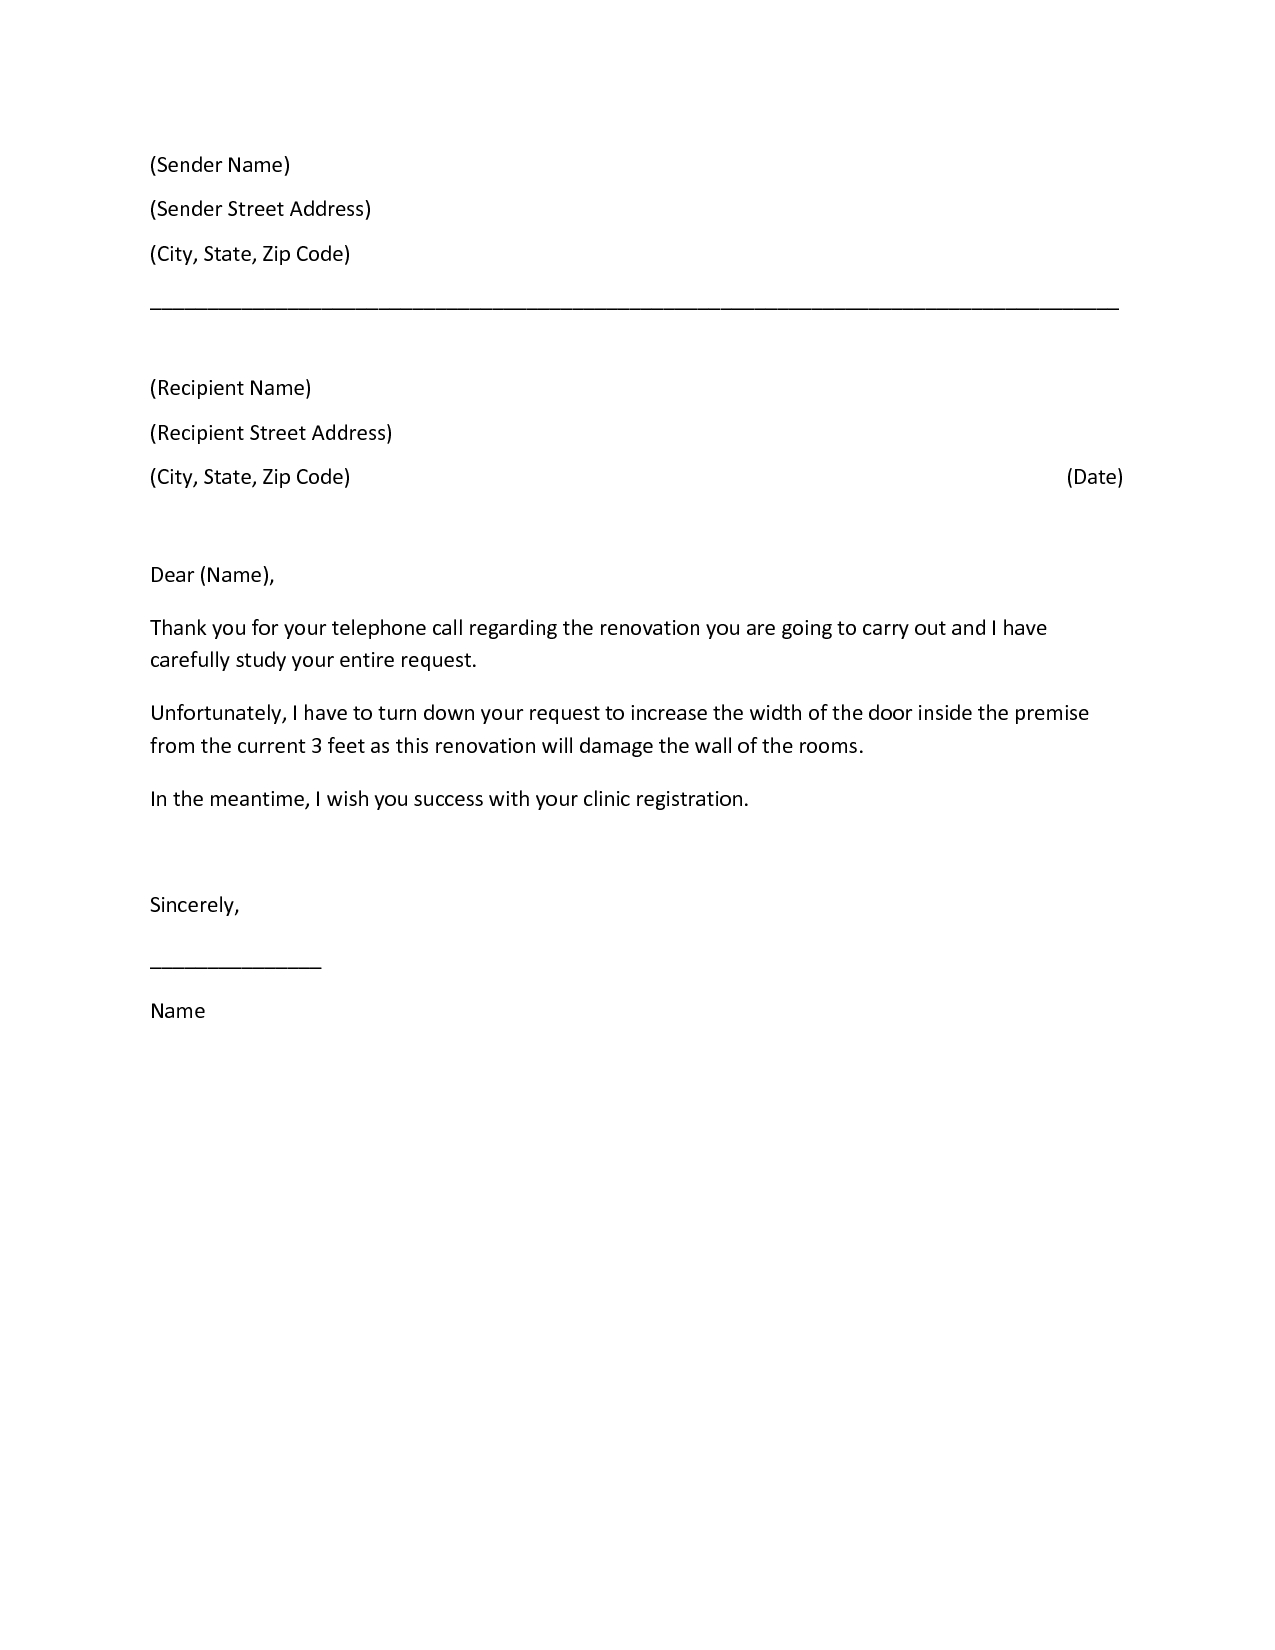 Housing Reference Letter Template - Sample Reference Letter From Landlord to Tenant Image Collections